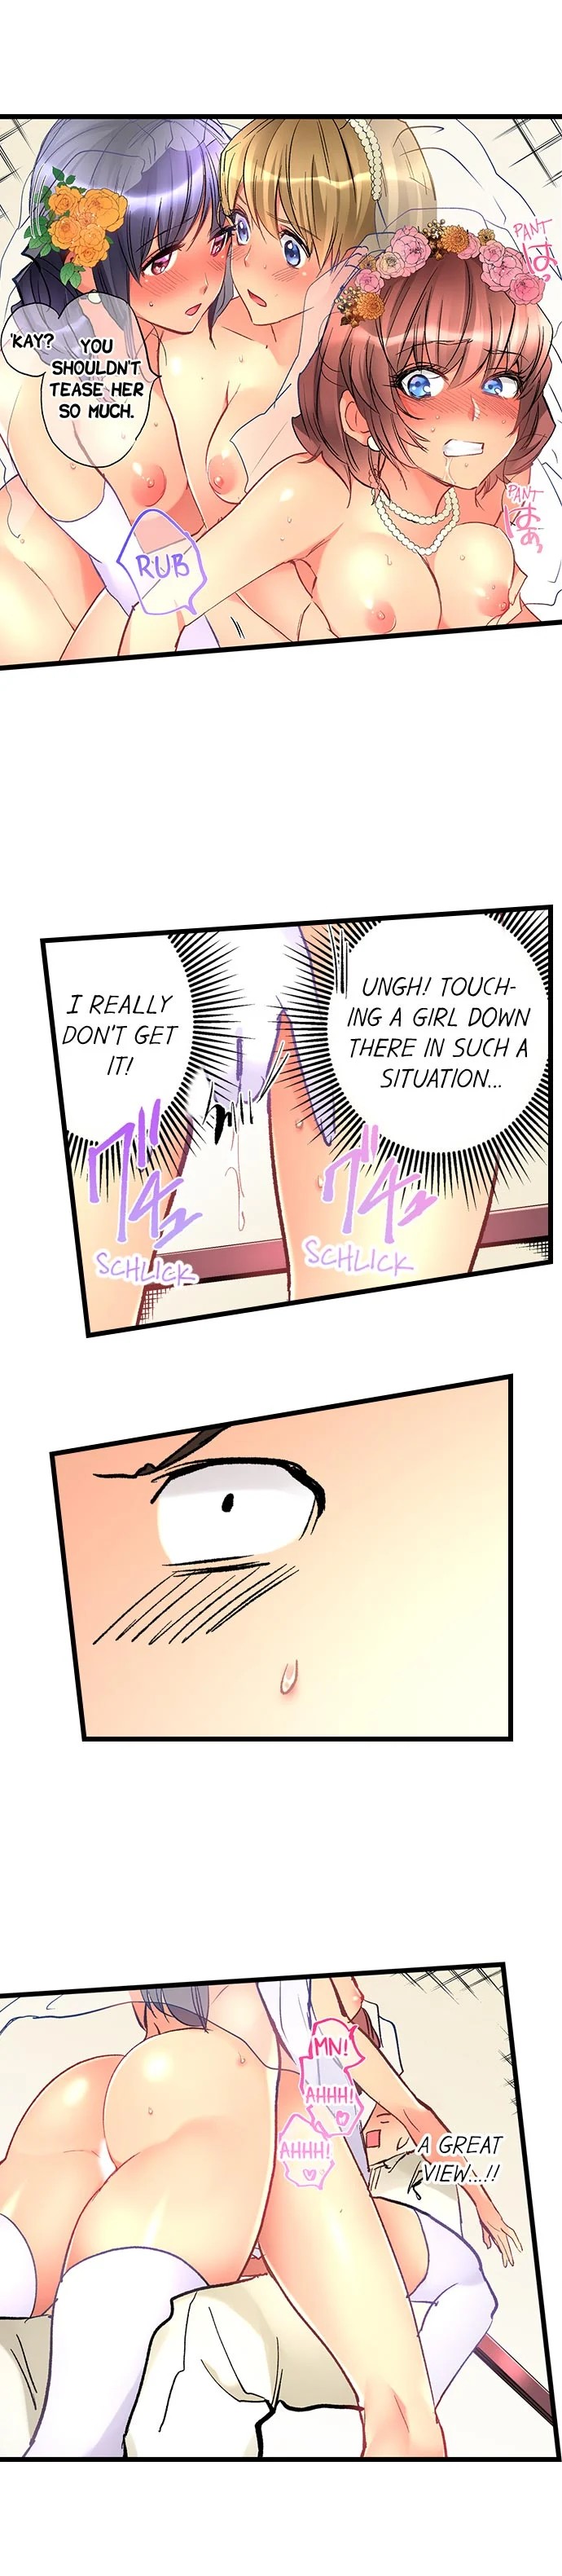 What She Fell On Was the Tip of My Dick - Chapter 57 Page 6